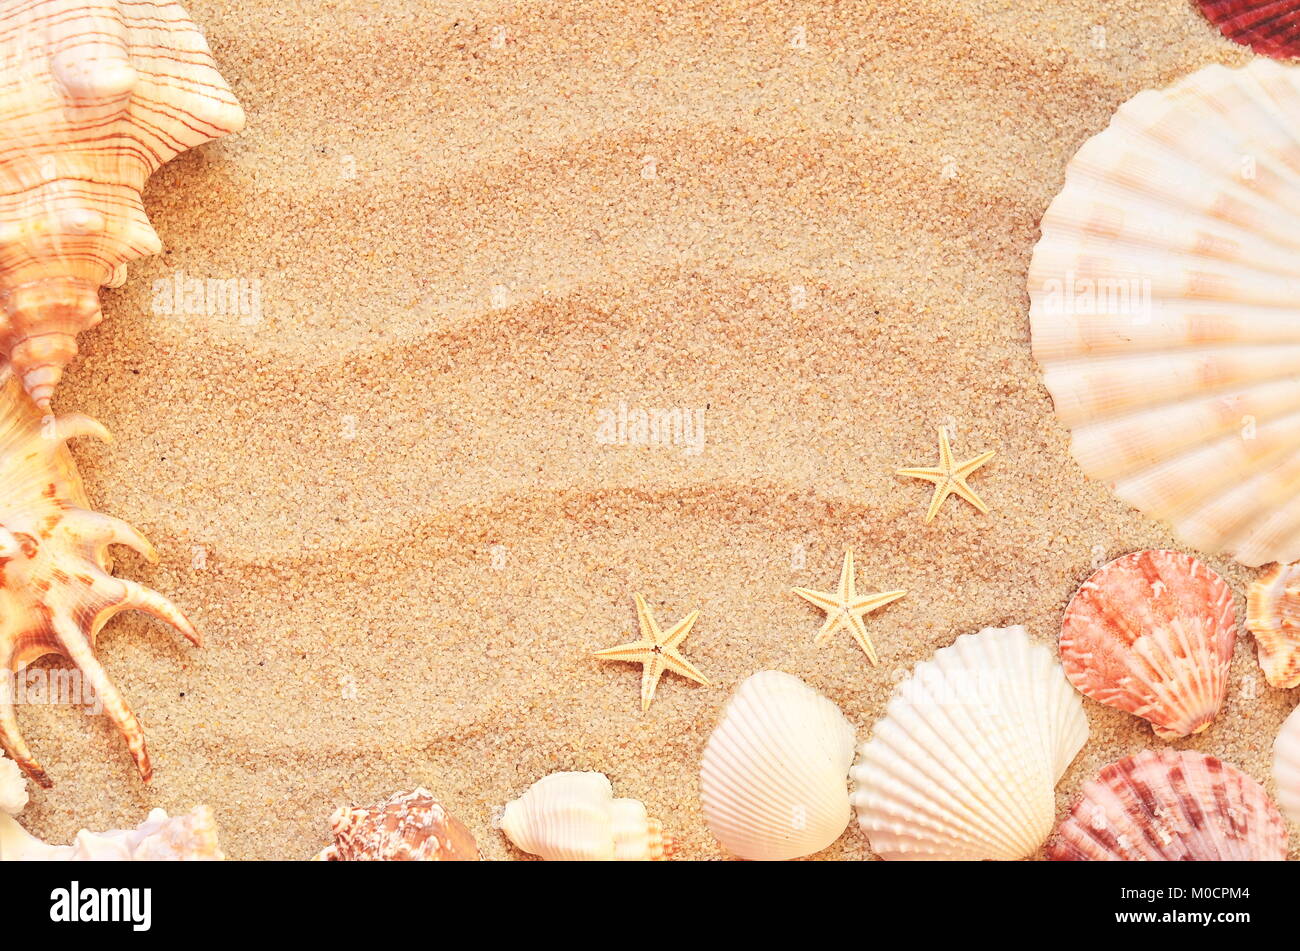 sea shells with sand as background. Summer concept. Stock Photo